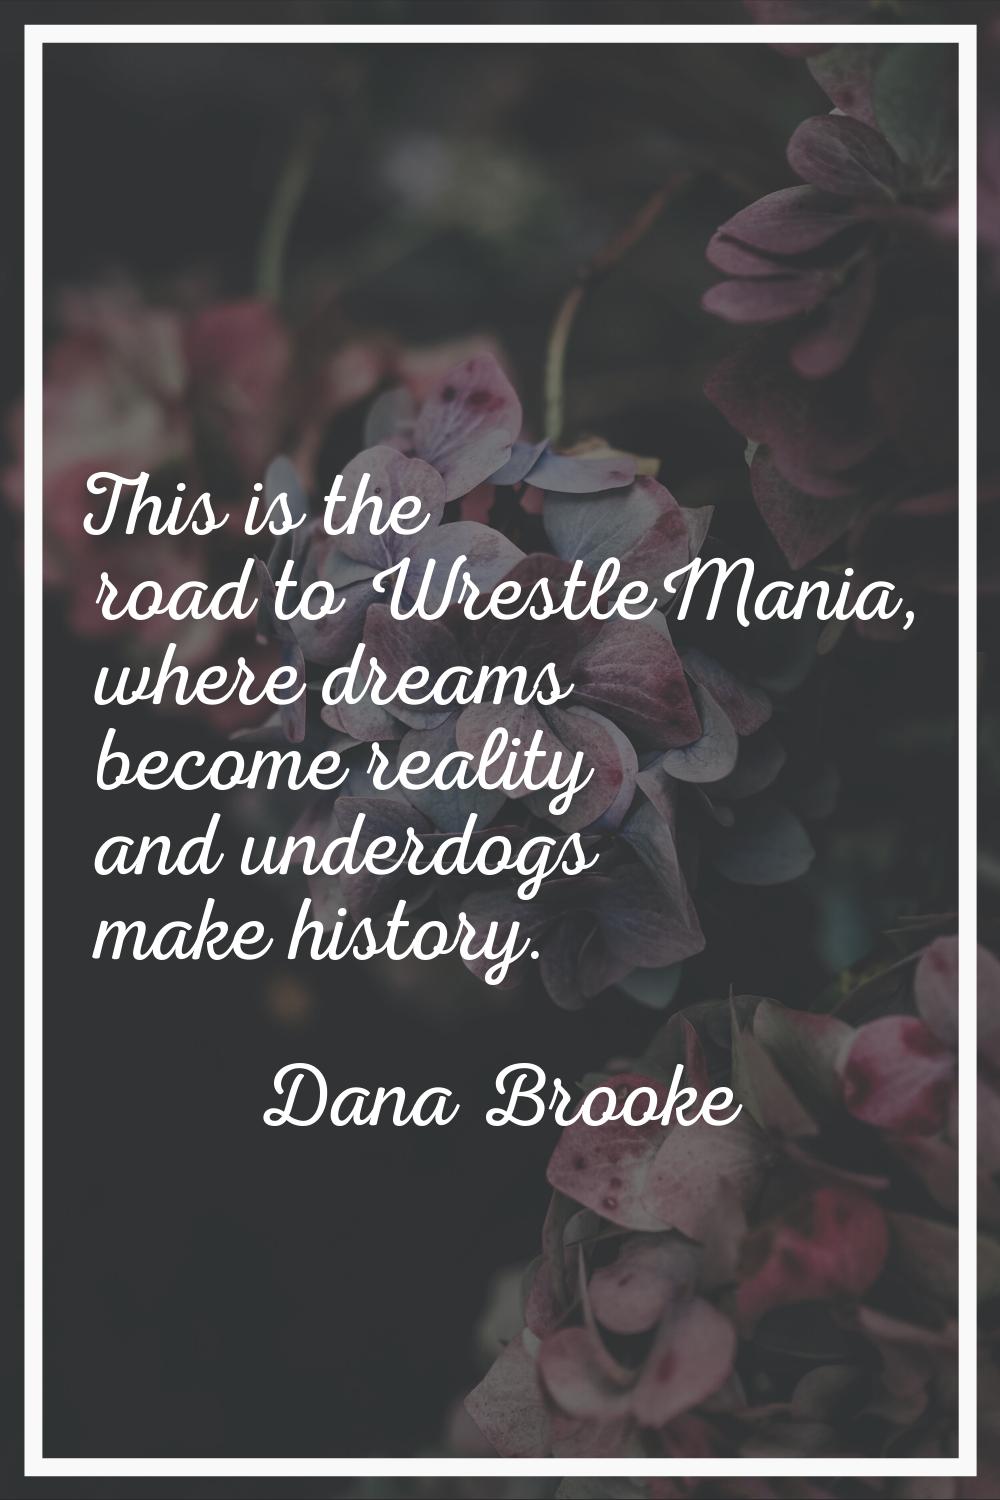 This is the road to WrestleMania, where dreams become reality and underdogs make history.